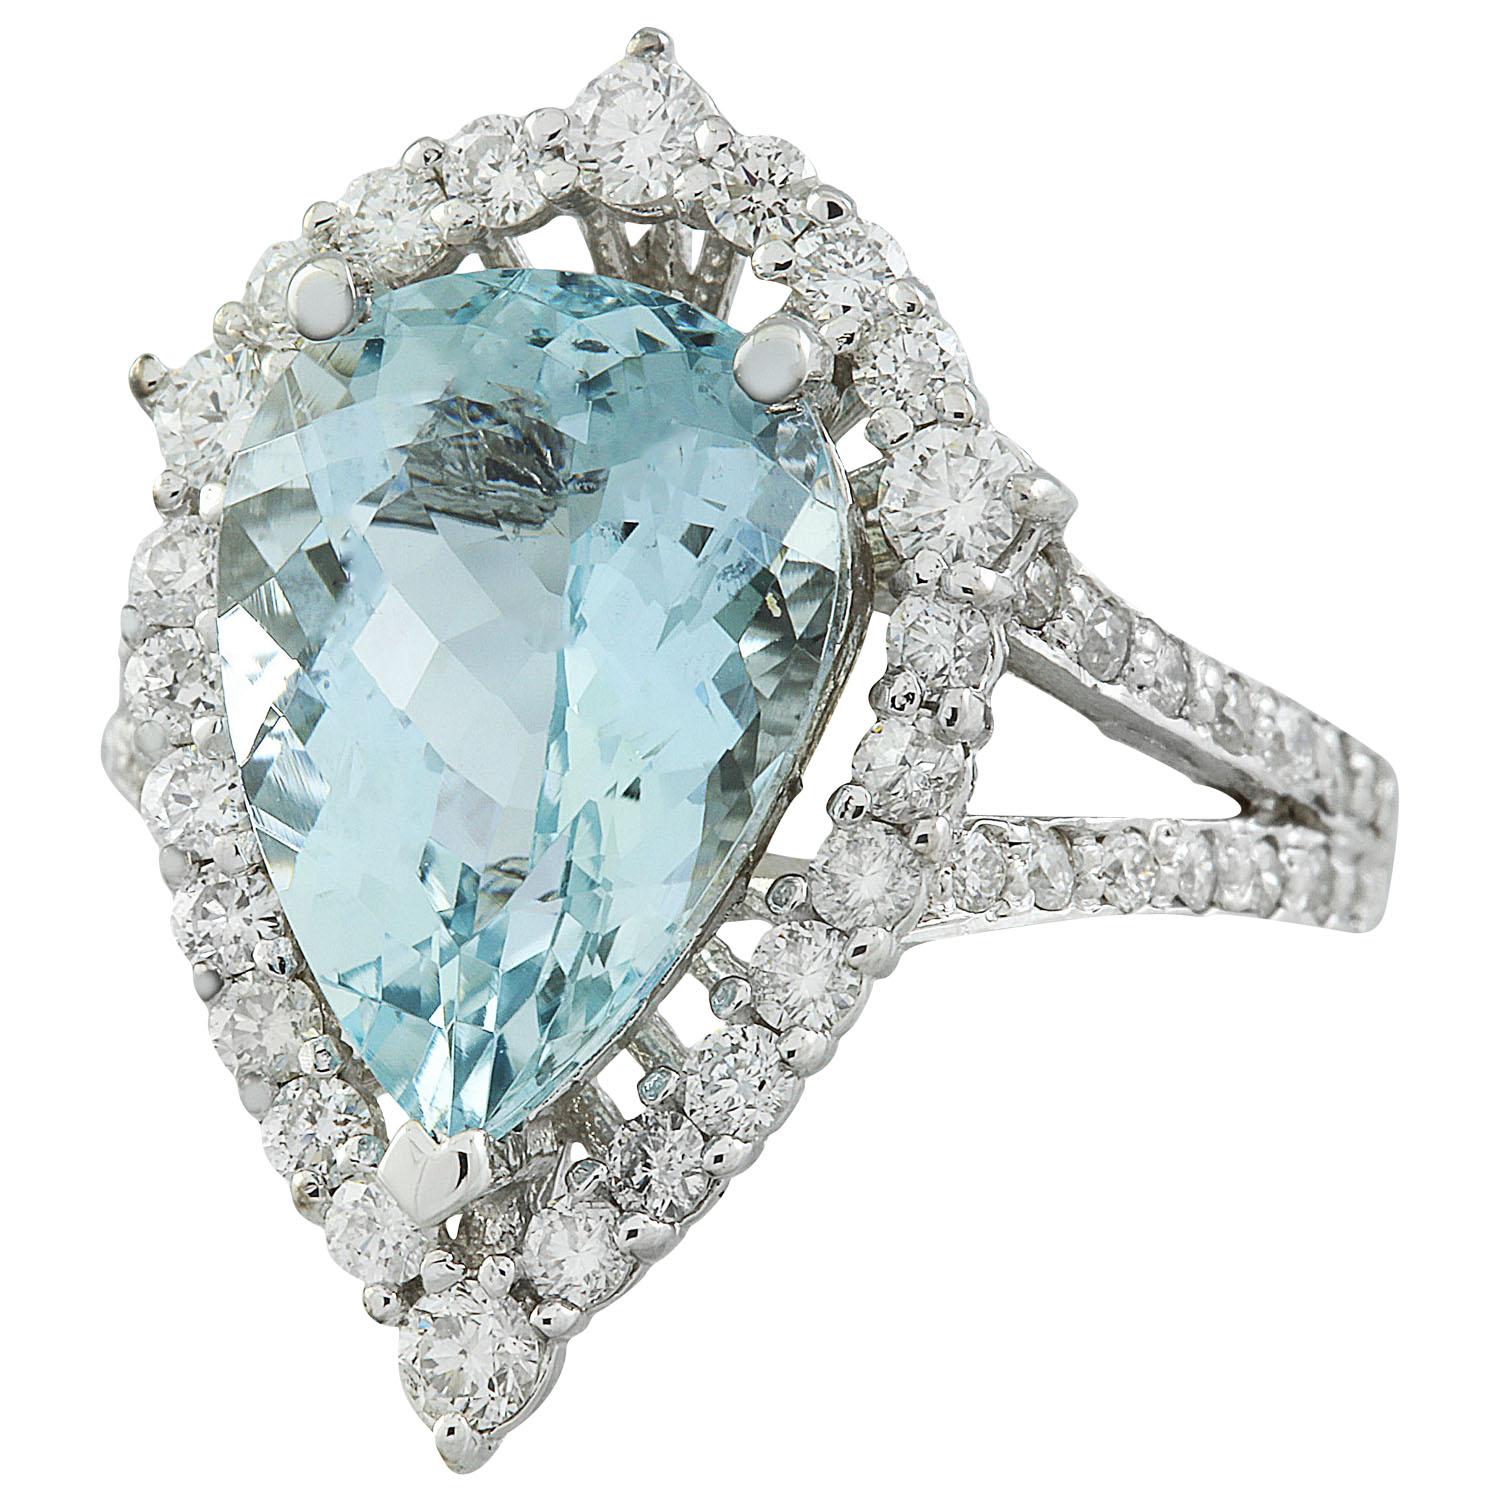 4.60 Carat Natural Aquamarine 14 Karat Solid White Gold Diamond Ring
Stamped: 14K 
Total Ring Weight: 4.2 Grams 
Aquamarine  Weight 3.80 Carat (13.00x9.00 Millimeters)
Diamond Weight: 0.80 carat (F-G Color, VS2-SI1 Clarity )
Quantity: 54
Face